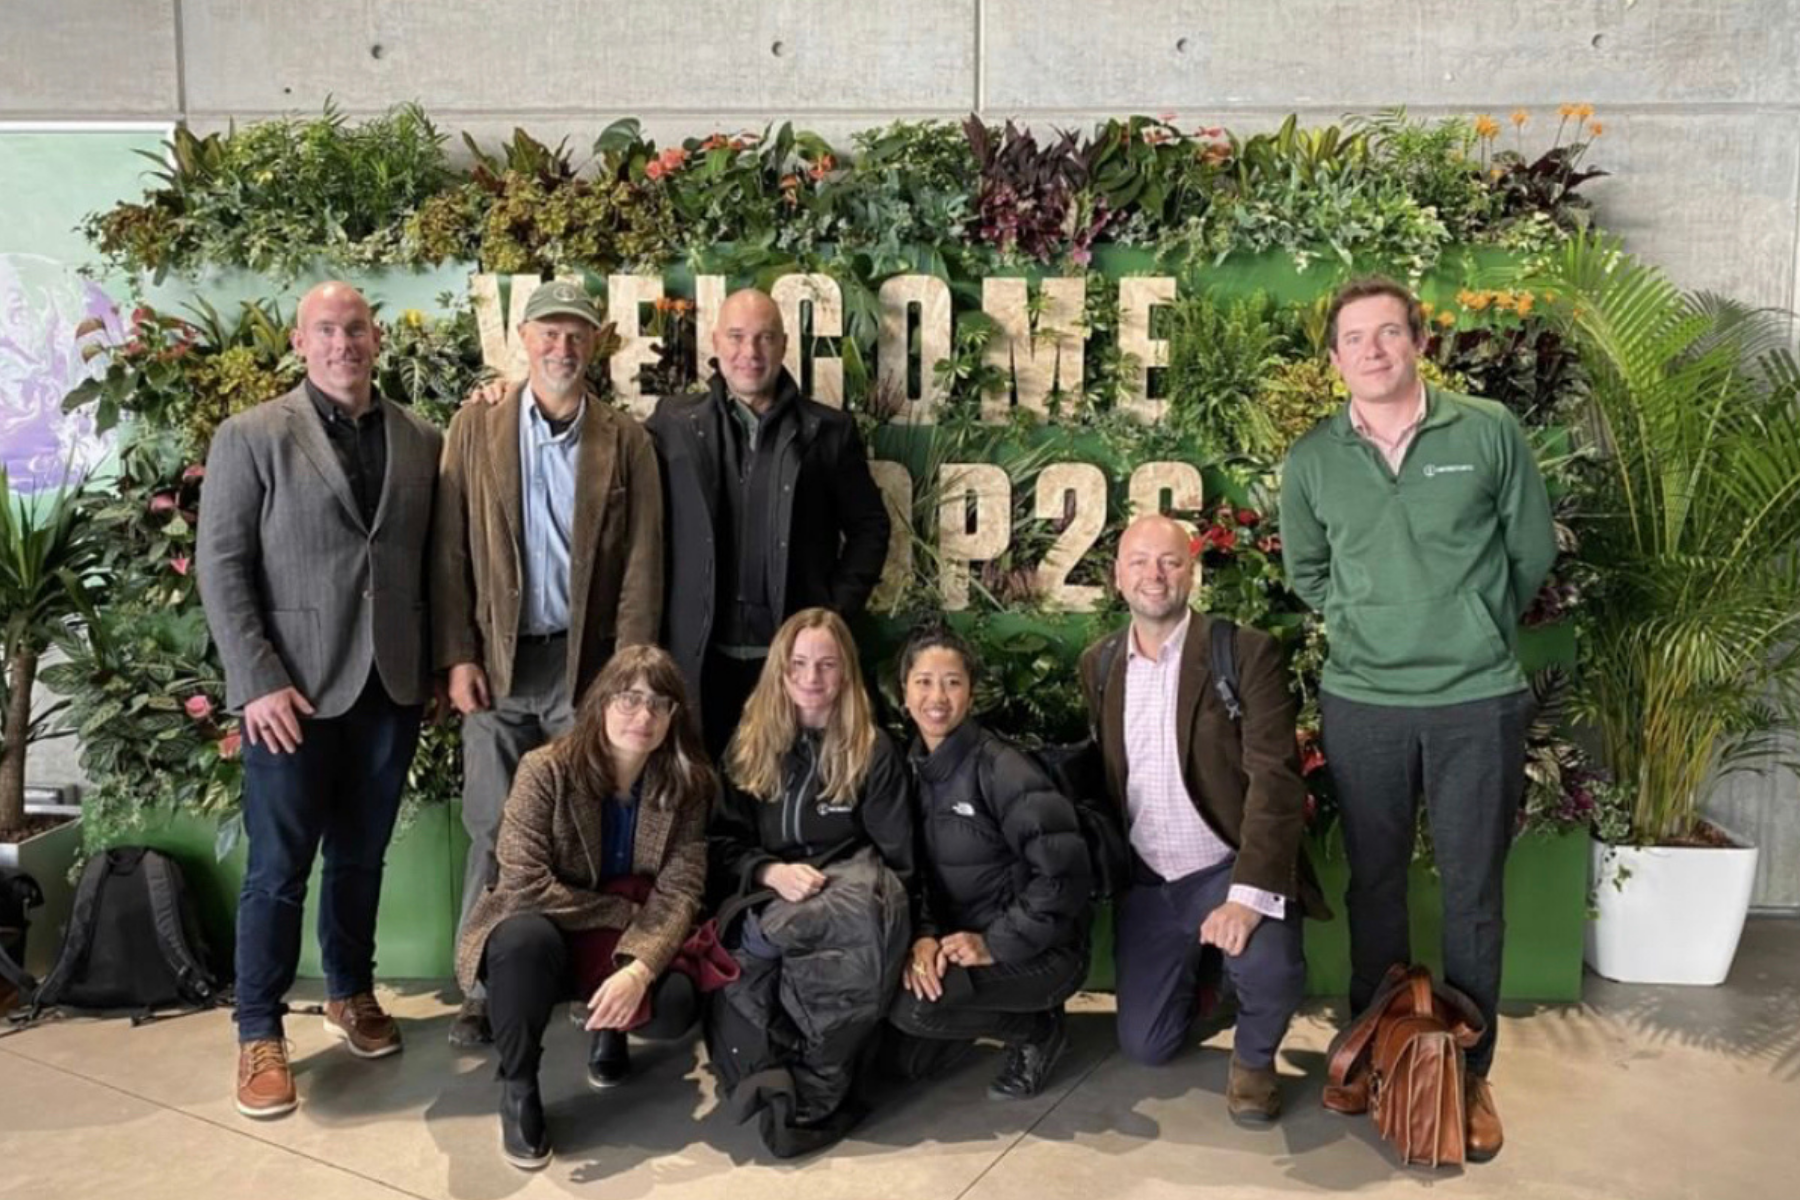 8 people standing in front of greenery at COP26